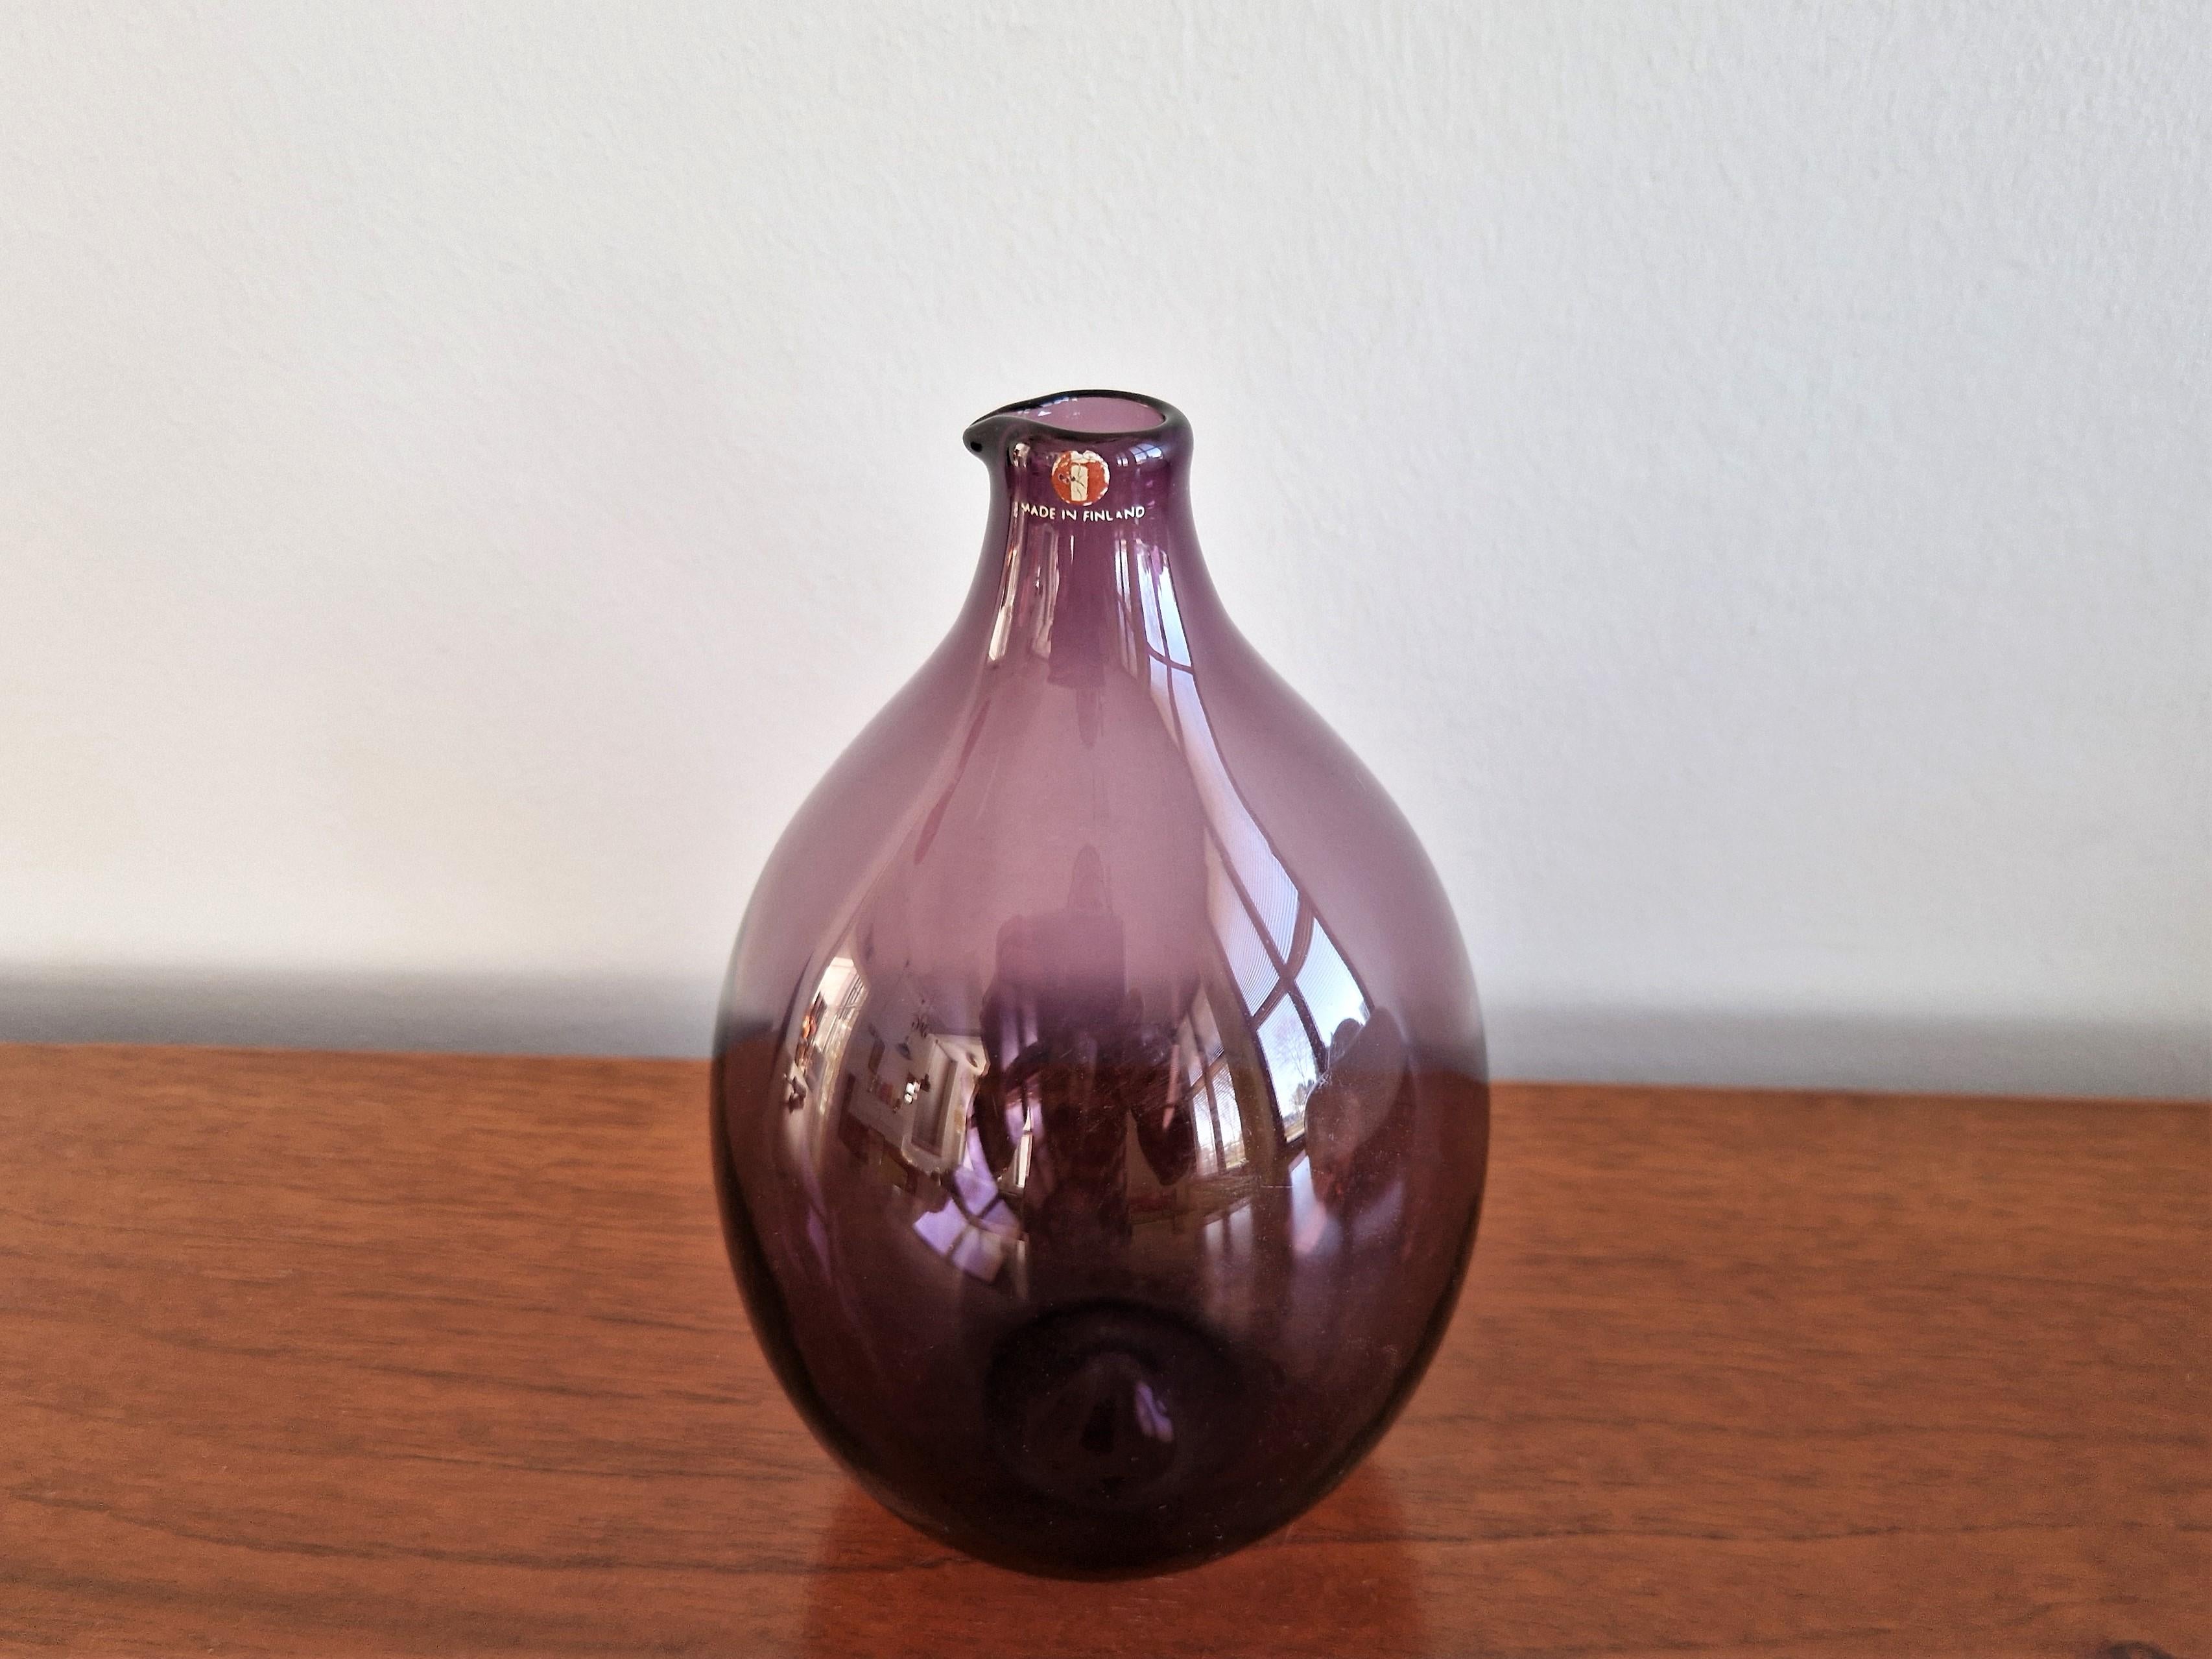 This purple glass 'Bird' bottle or vase was designed by Timo Sarpaneva for Iittala in Finland in 1956. It was in production from 1957 to 1966 and was available in various colors. It is in a very good condition with minor signs of age and use. It is